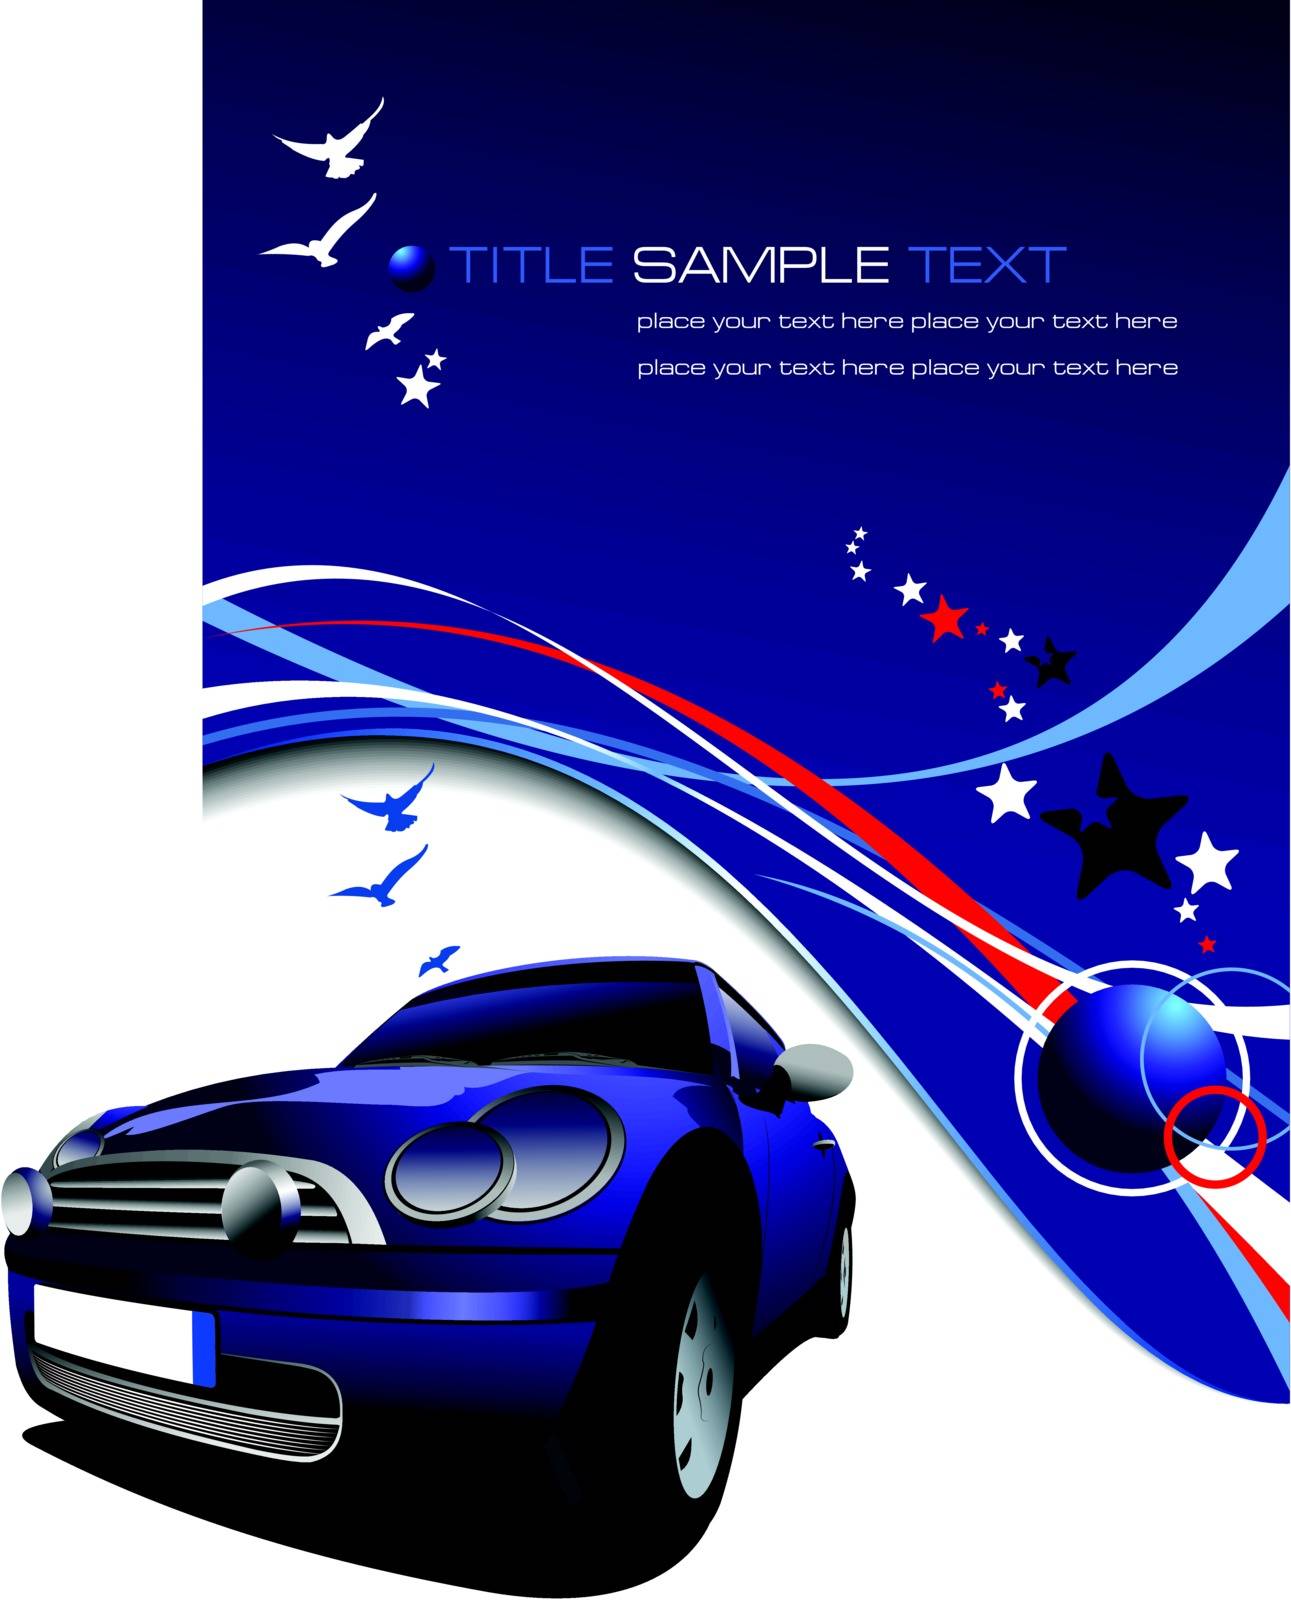 Blue background with blue car, stars and blue birds images . Vec by leonido